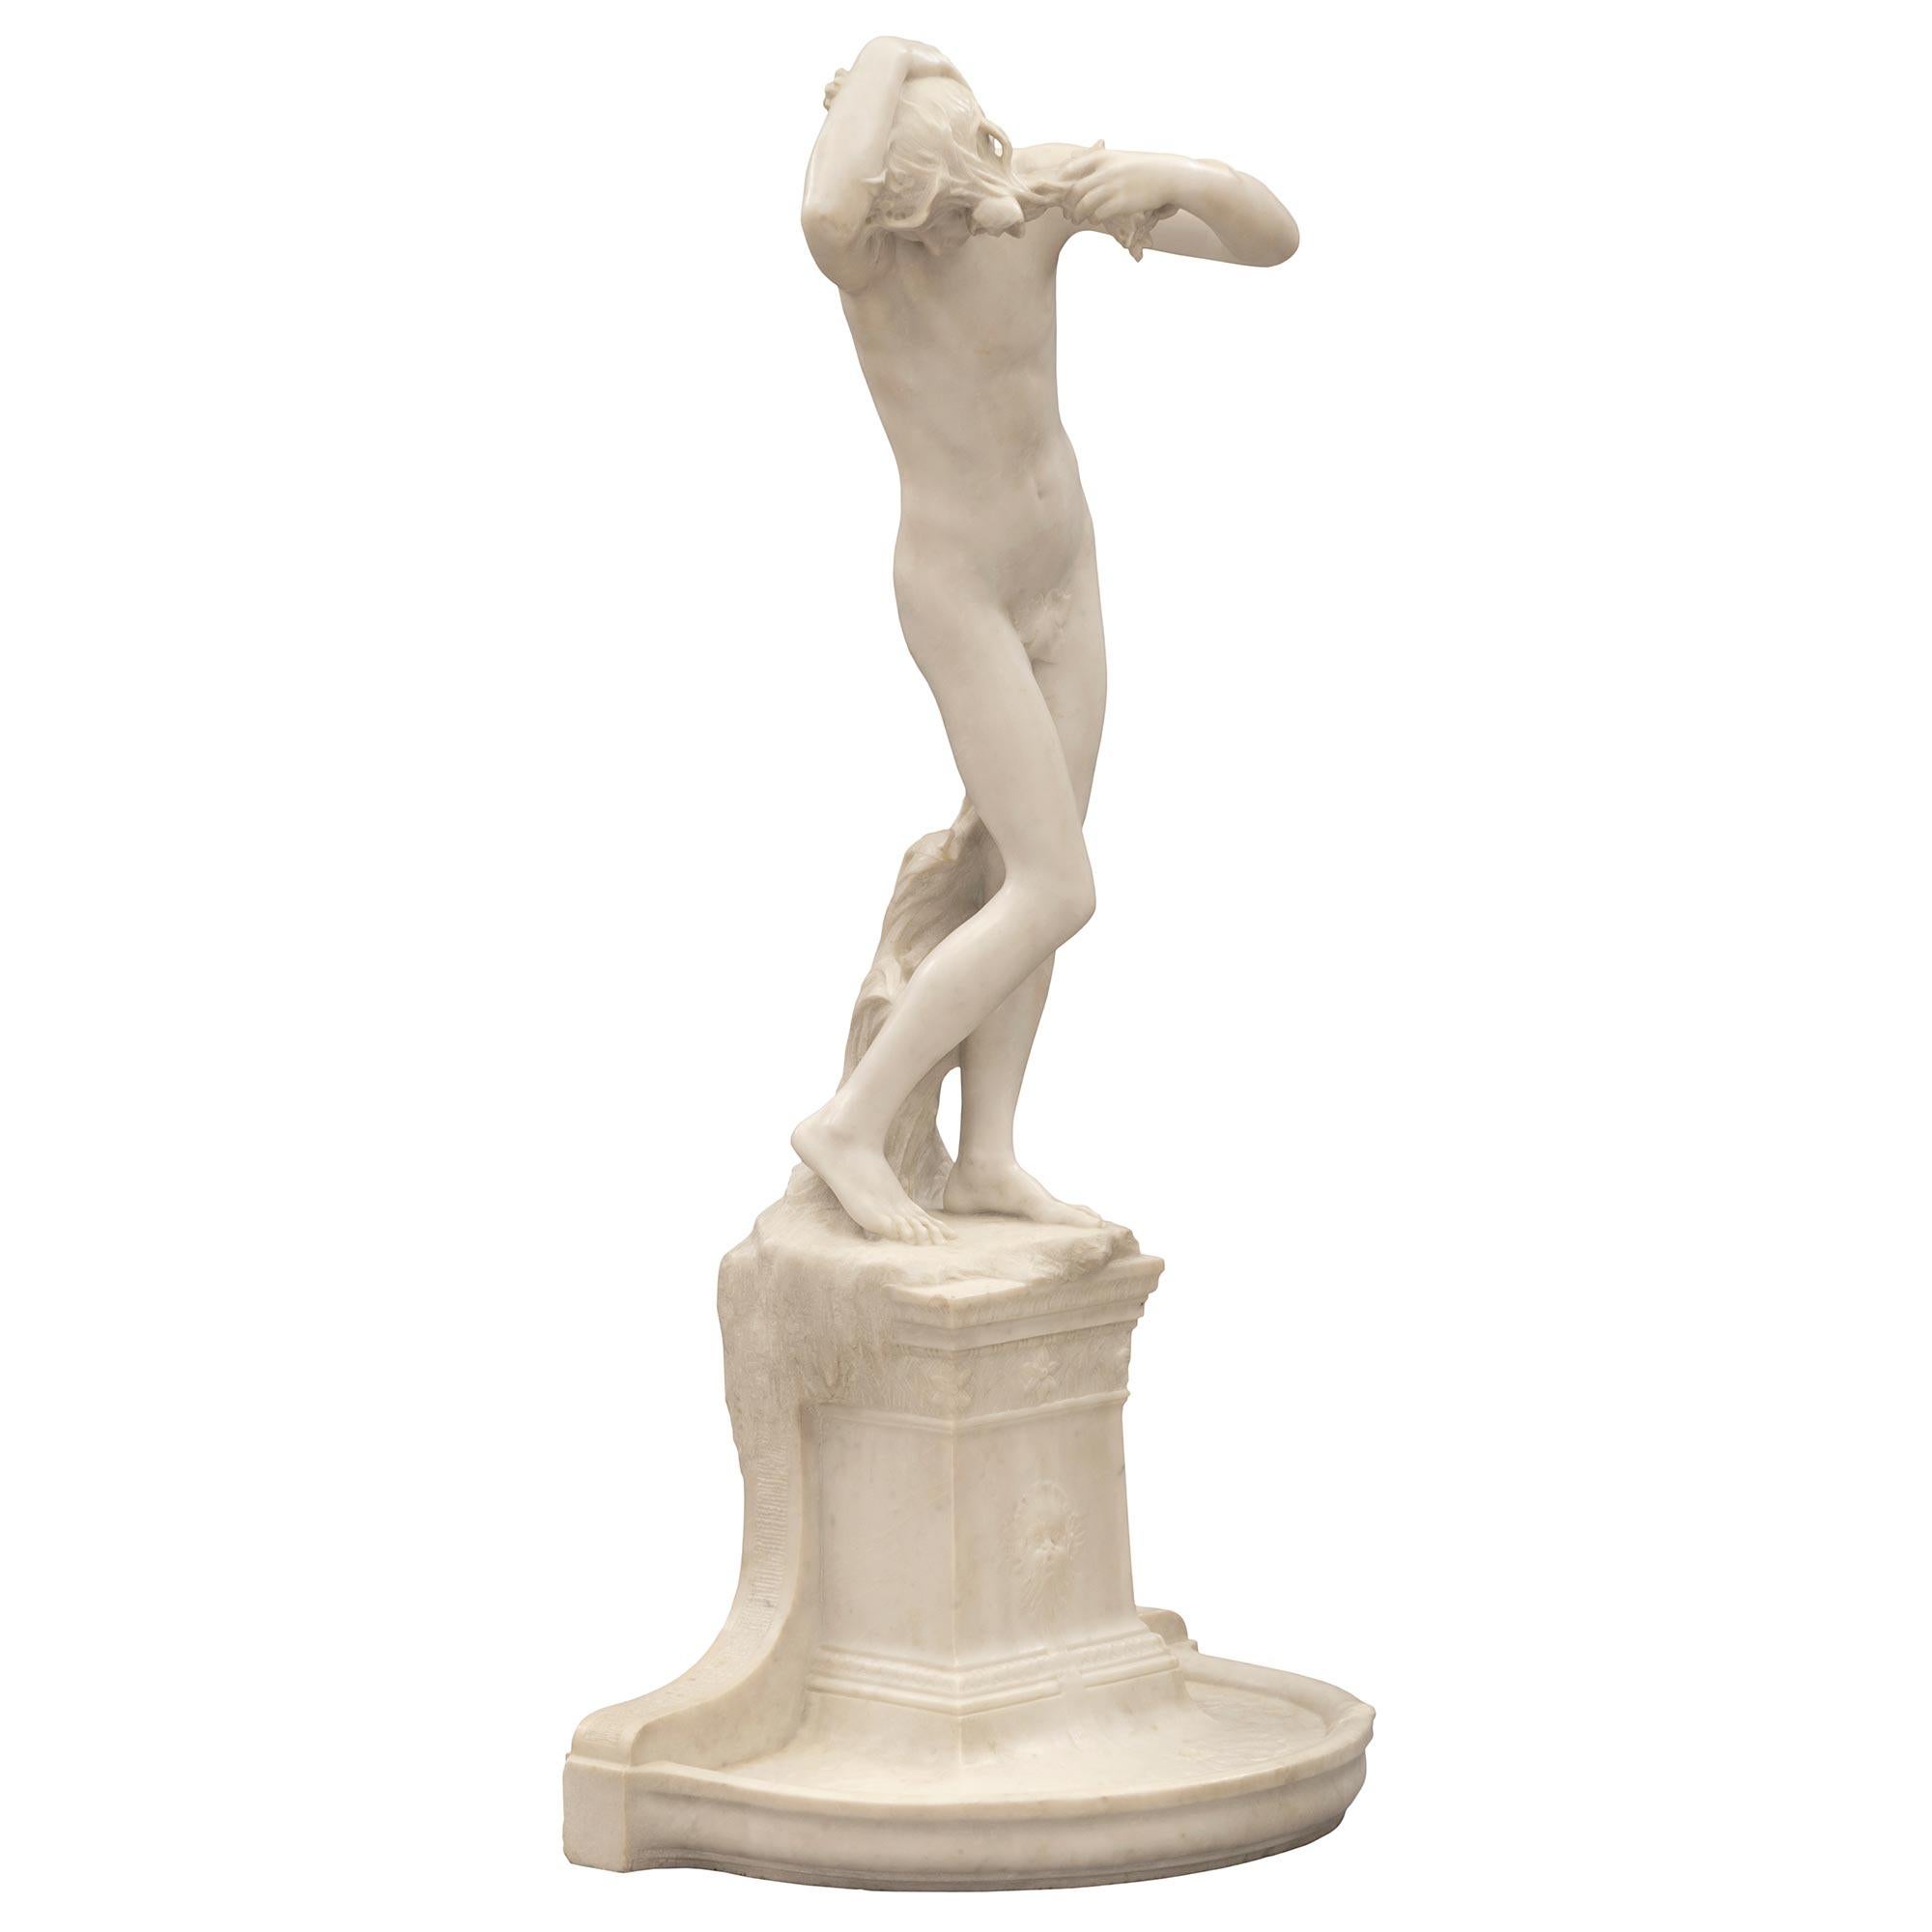 An exceptional and most elegant French 19th century solid white Carrara marble statue/basin signed Henri Leon Greber. The statue titled 